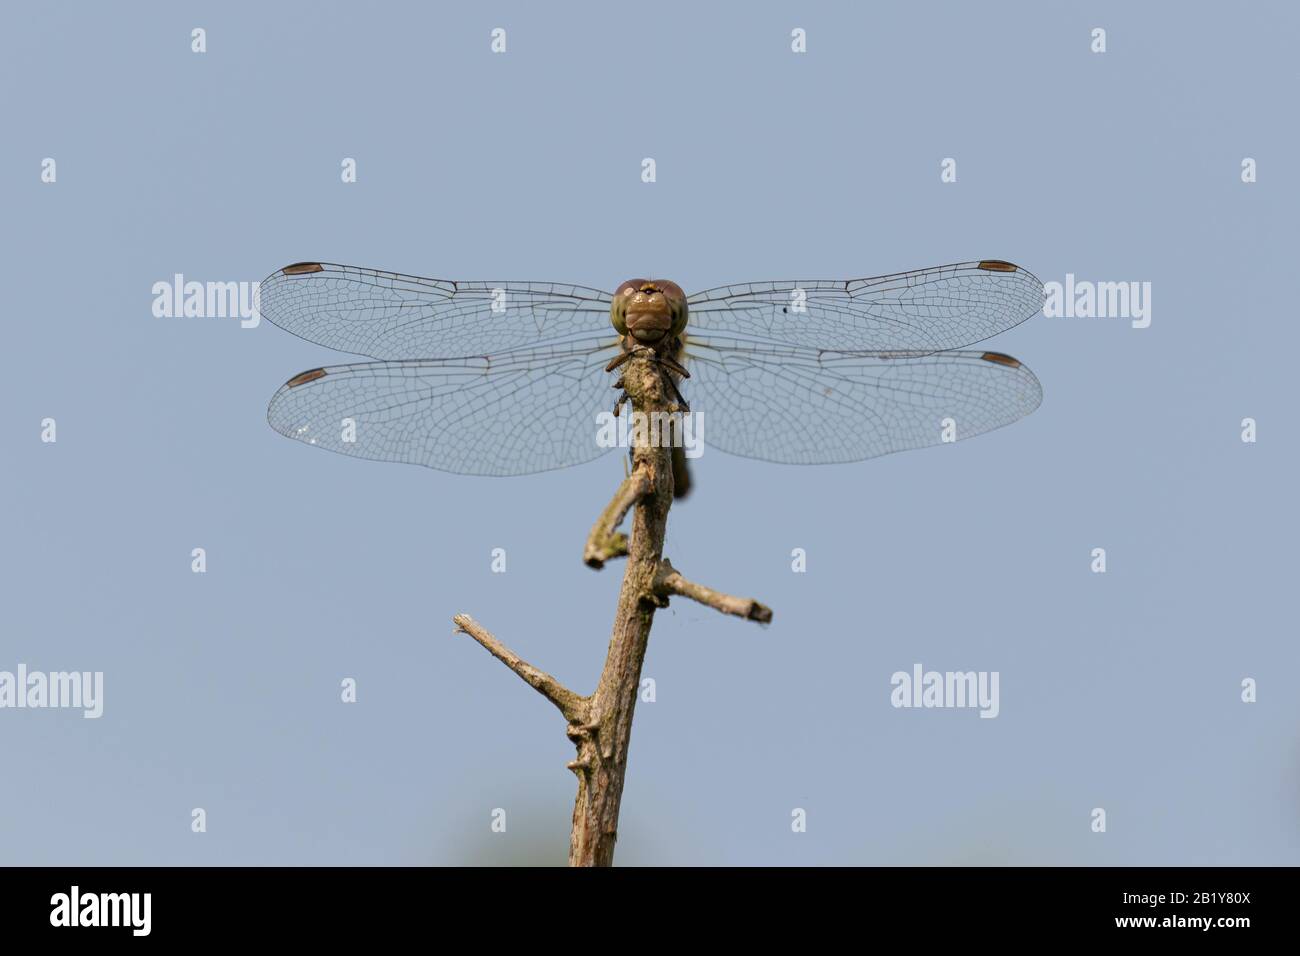 A close up view of a dragonfly perched on a twig Stock Photo